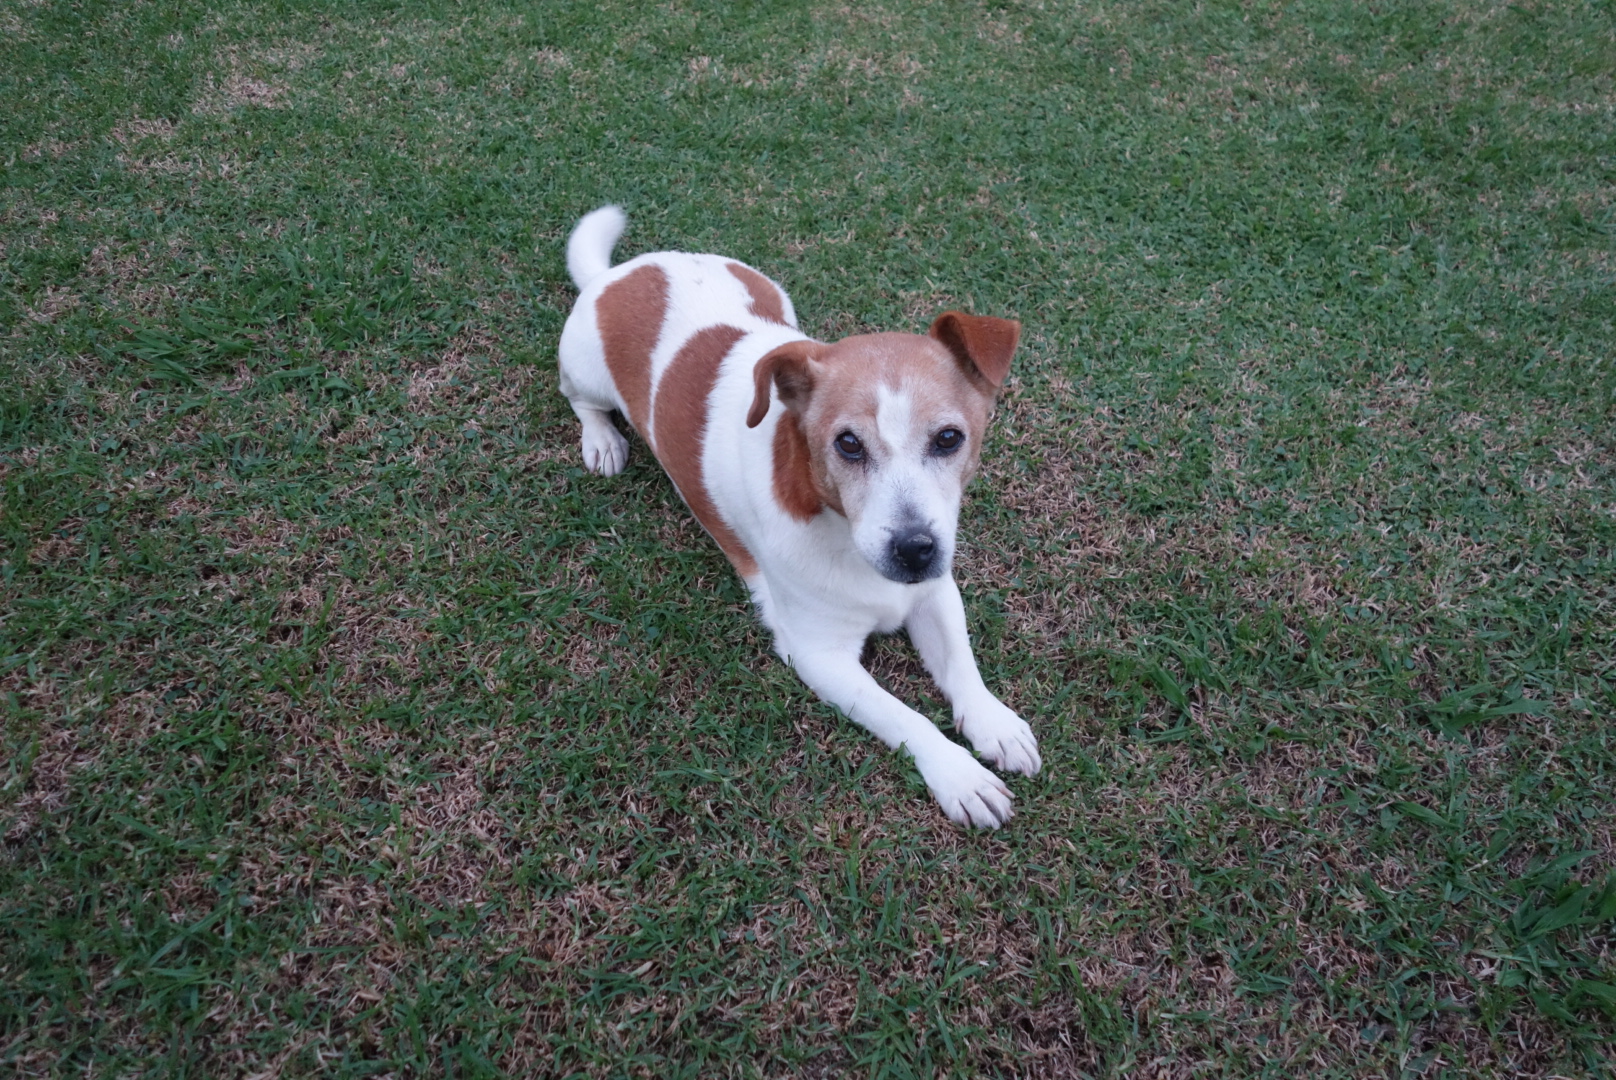 Full breed Jack russell 